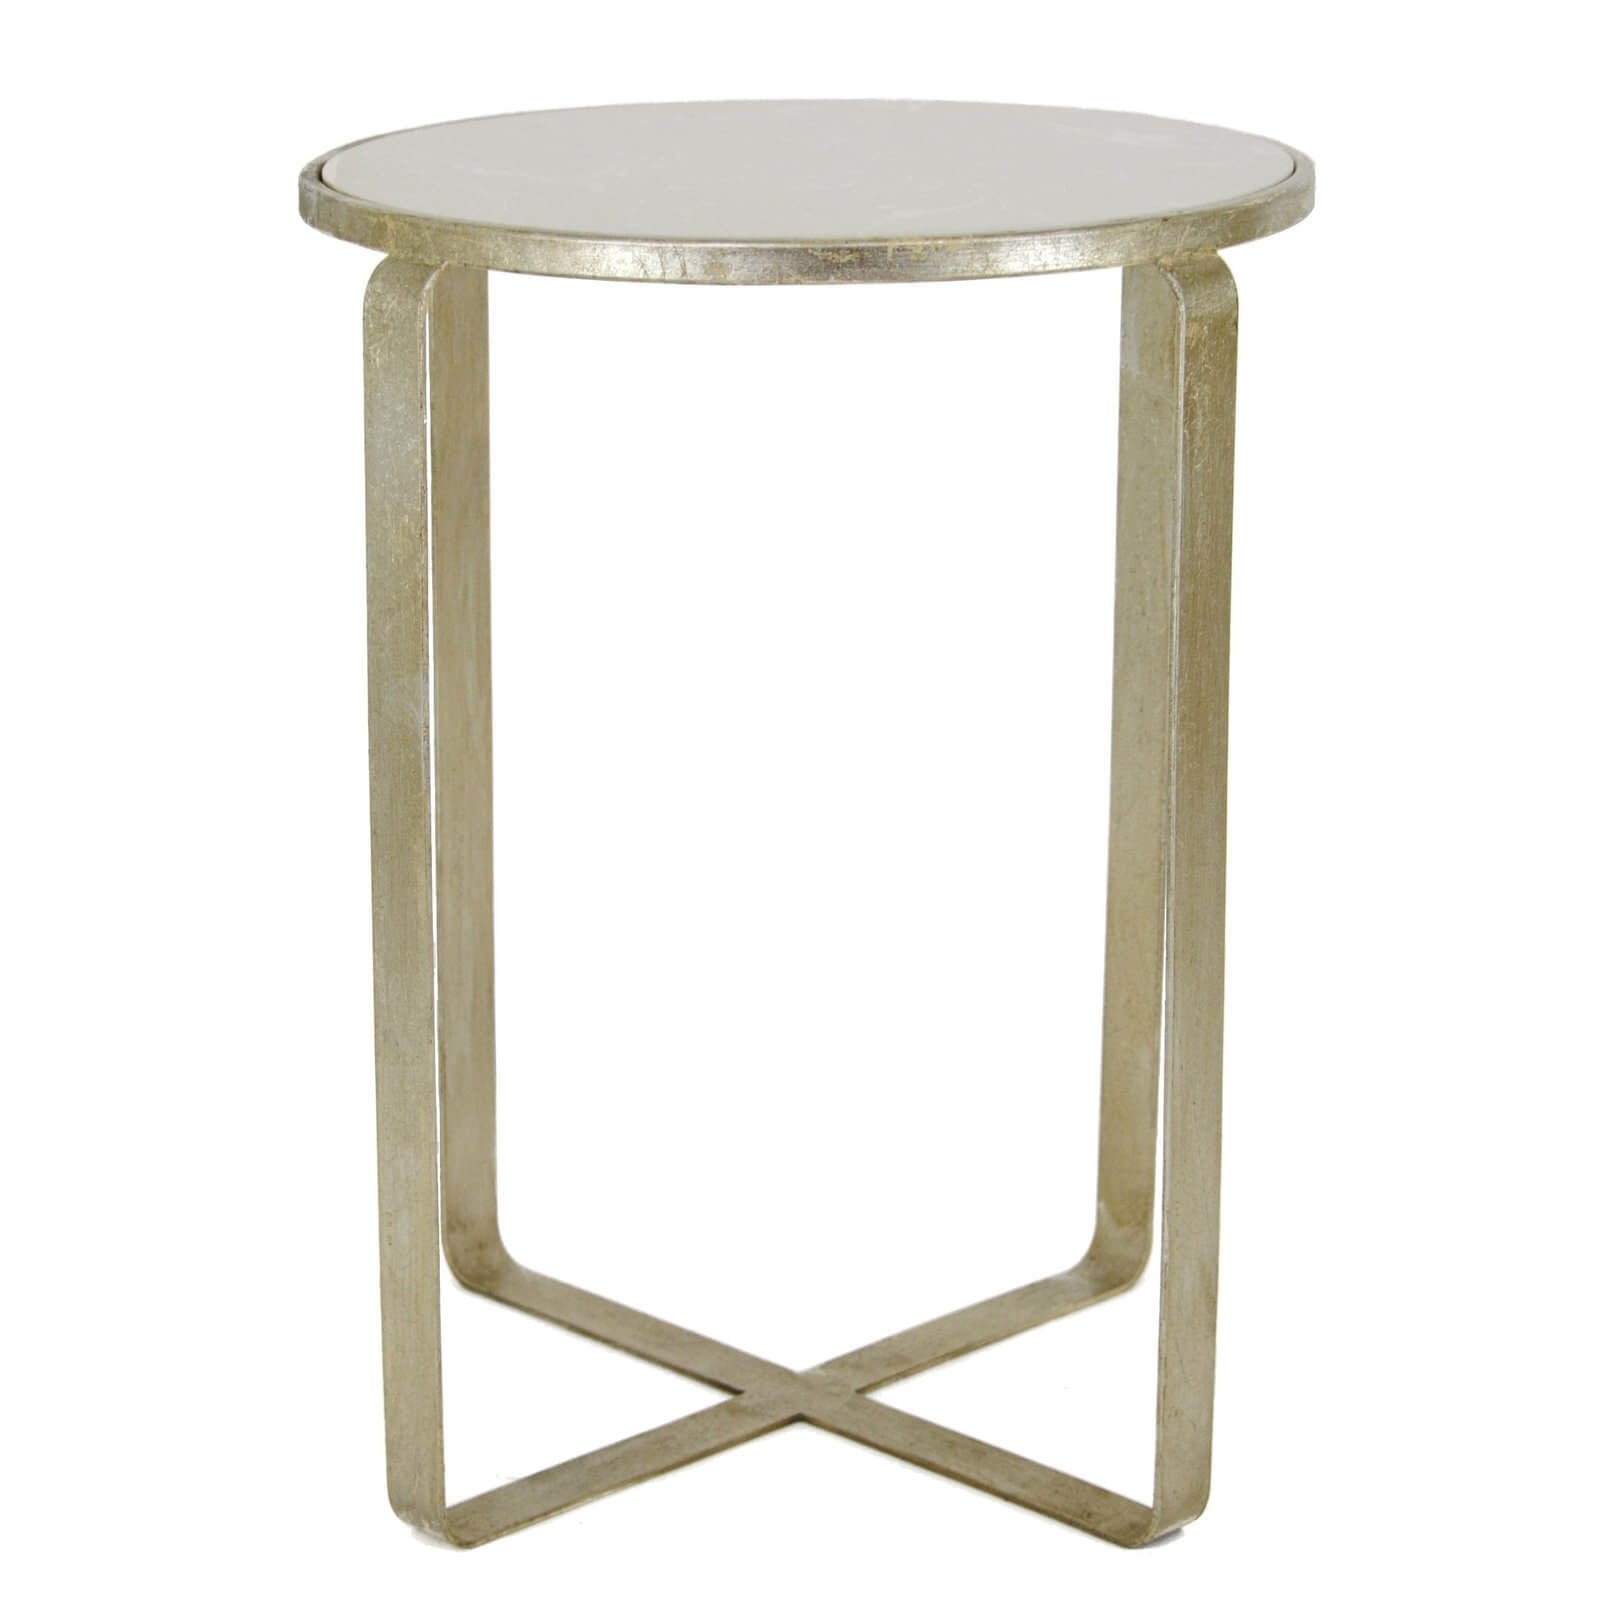 Dona Silver Leaf Stone Top Side Table - Lillian Home 